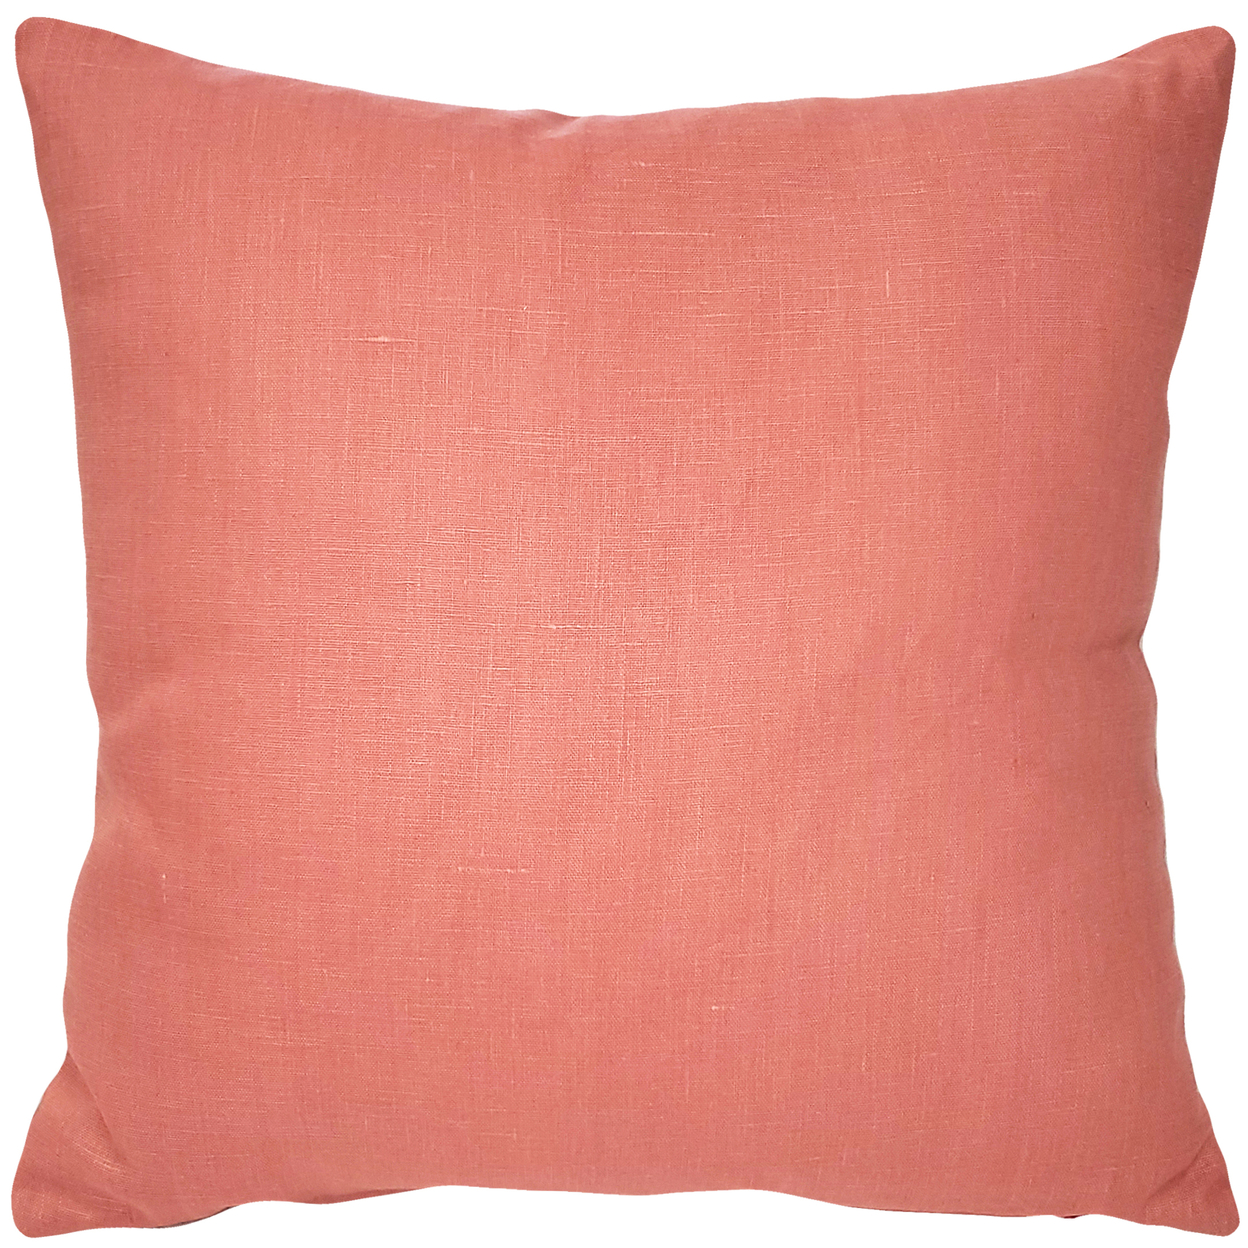 Tuscany Linen Deep Blush Throw Pillow 17x17, With Polyfill Insert